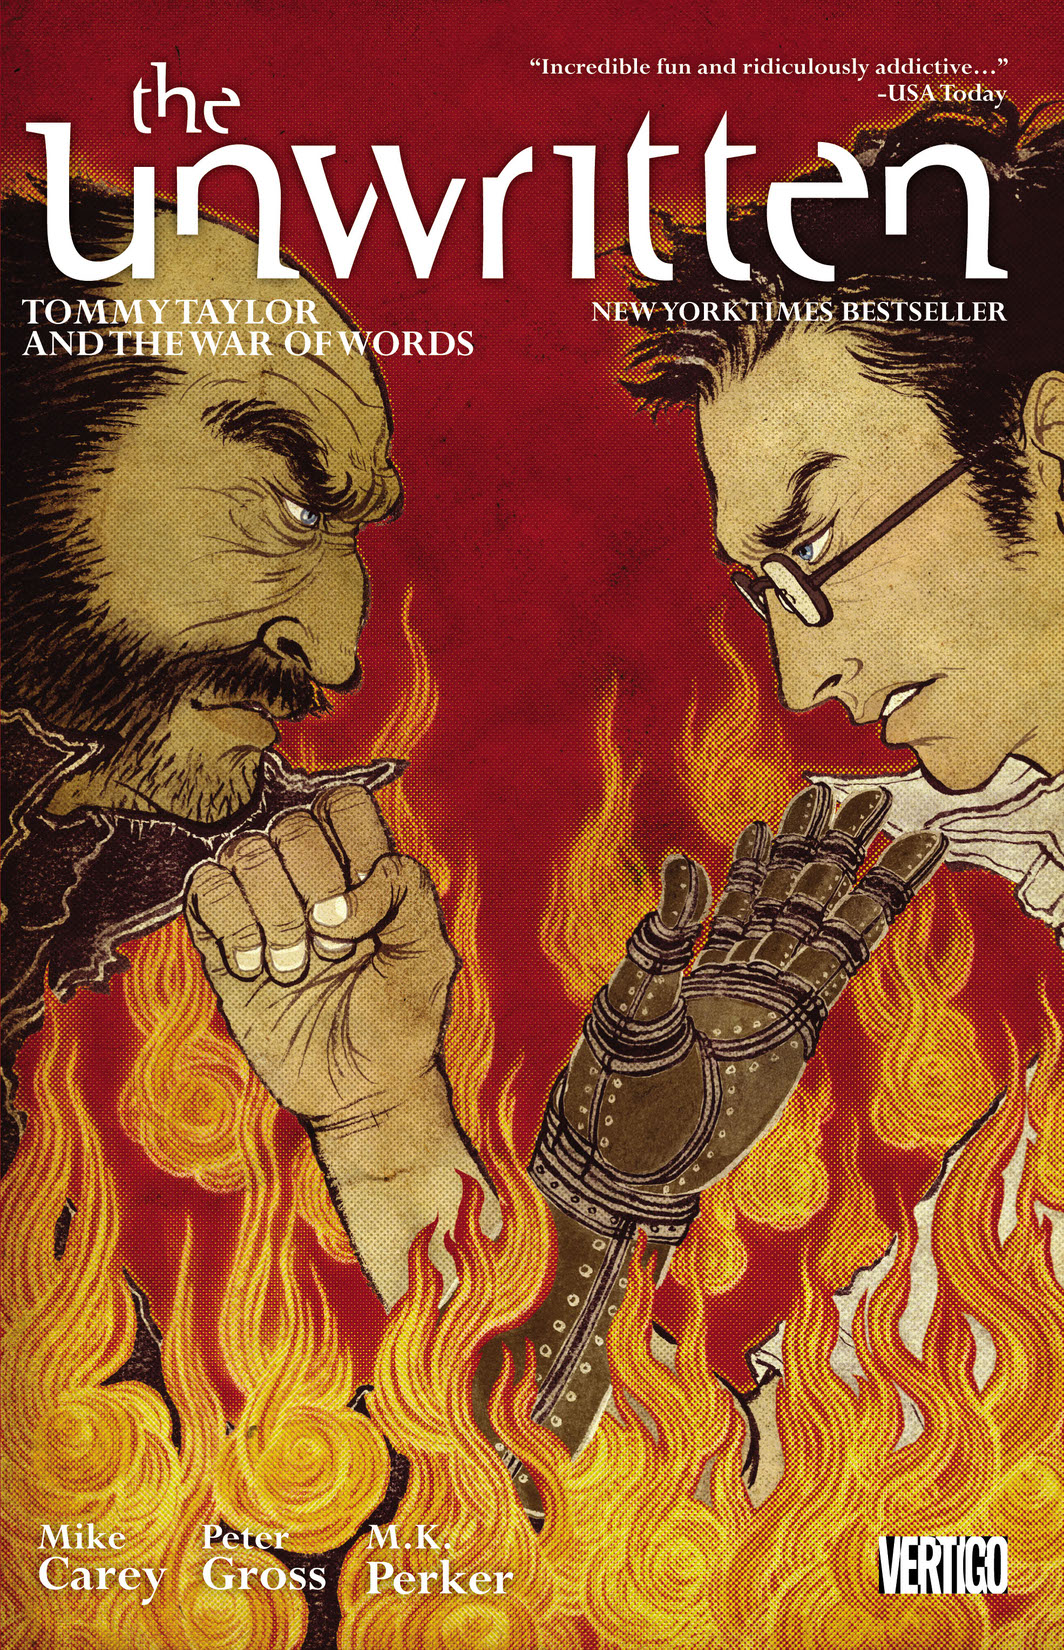 The Unwritten Vol. 6: Tommy Taylor and the War of Words preview images